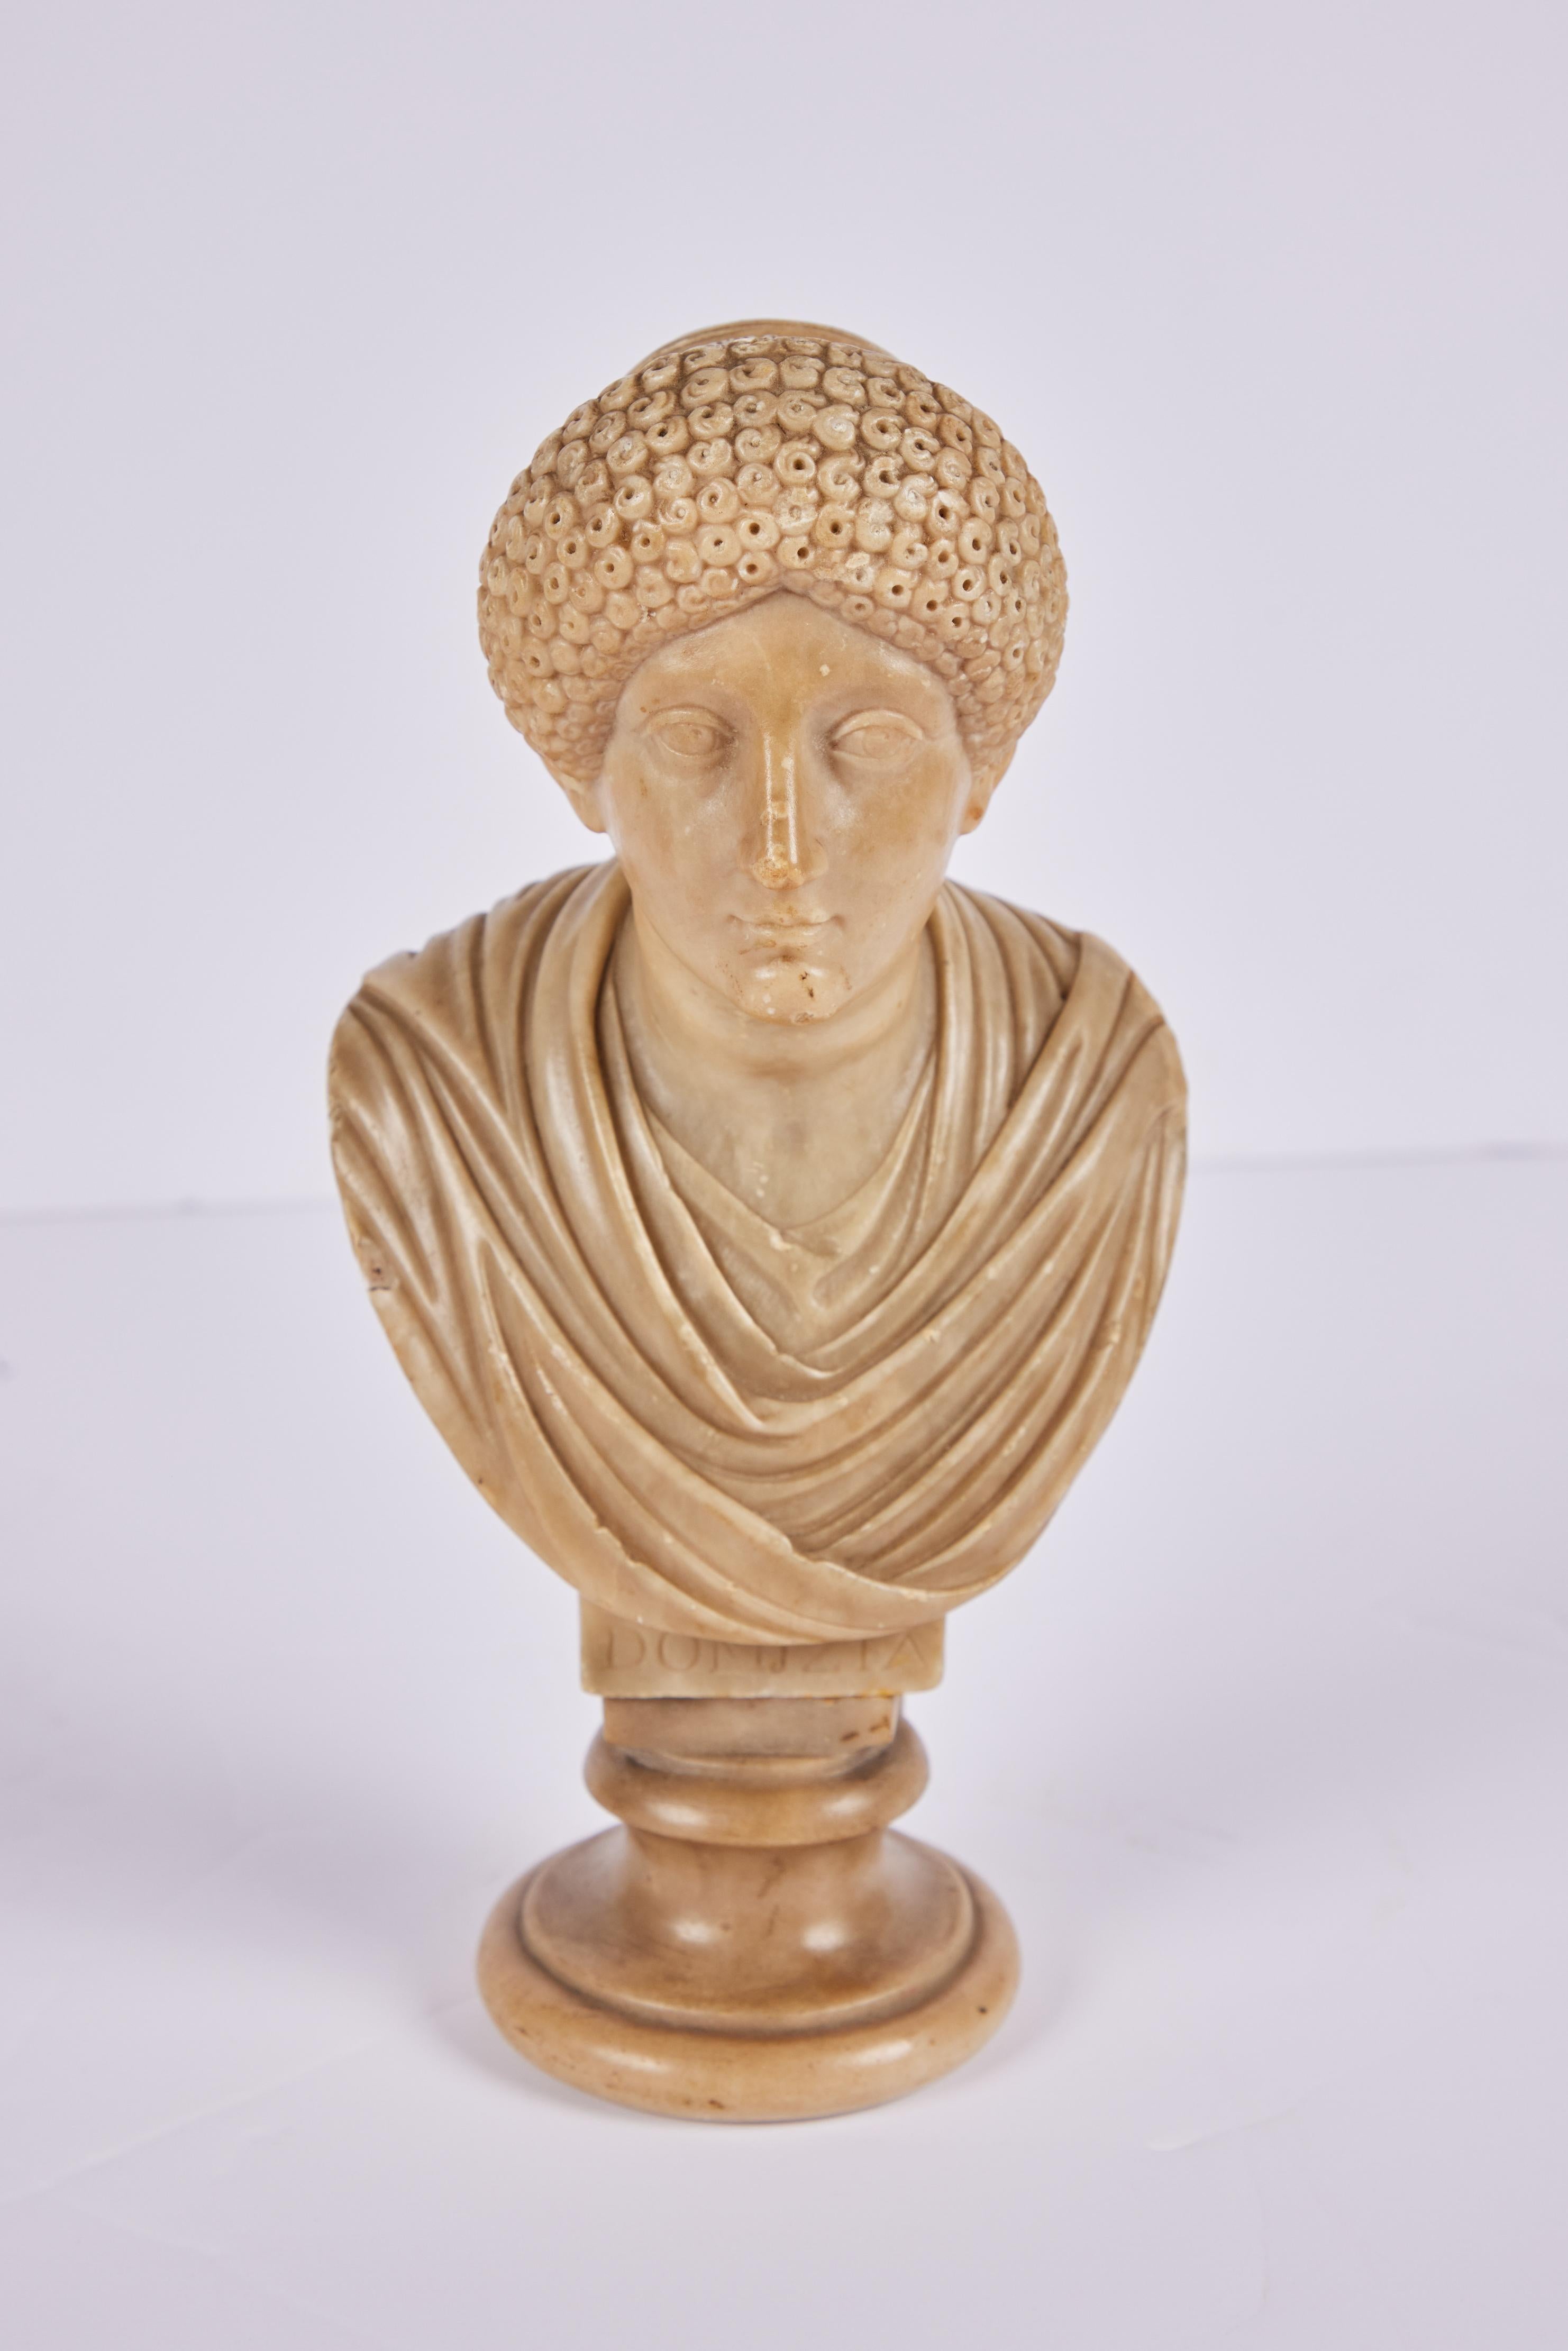 A petite 19th c. hand-carved alabaster bust of Empress Domitia Longina (c. 50-126, CE) in an elaborate hairstyle of the period. Sitting on a raised base of the same alabaster. Inscribed 